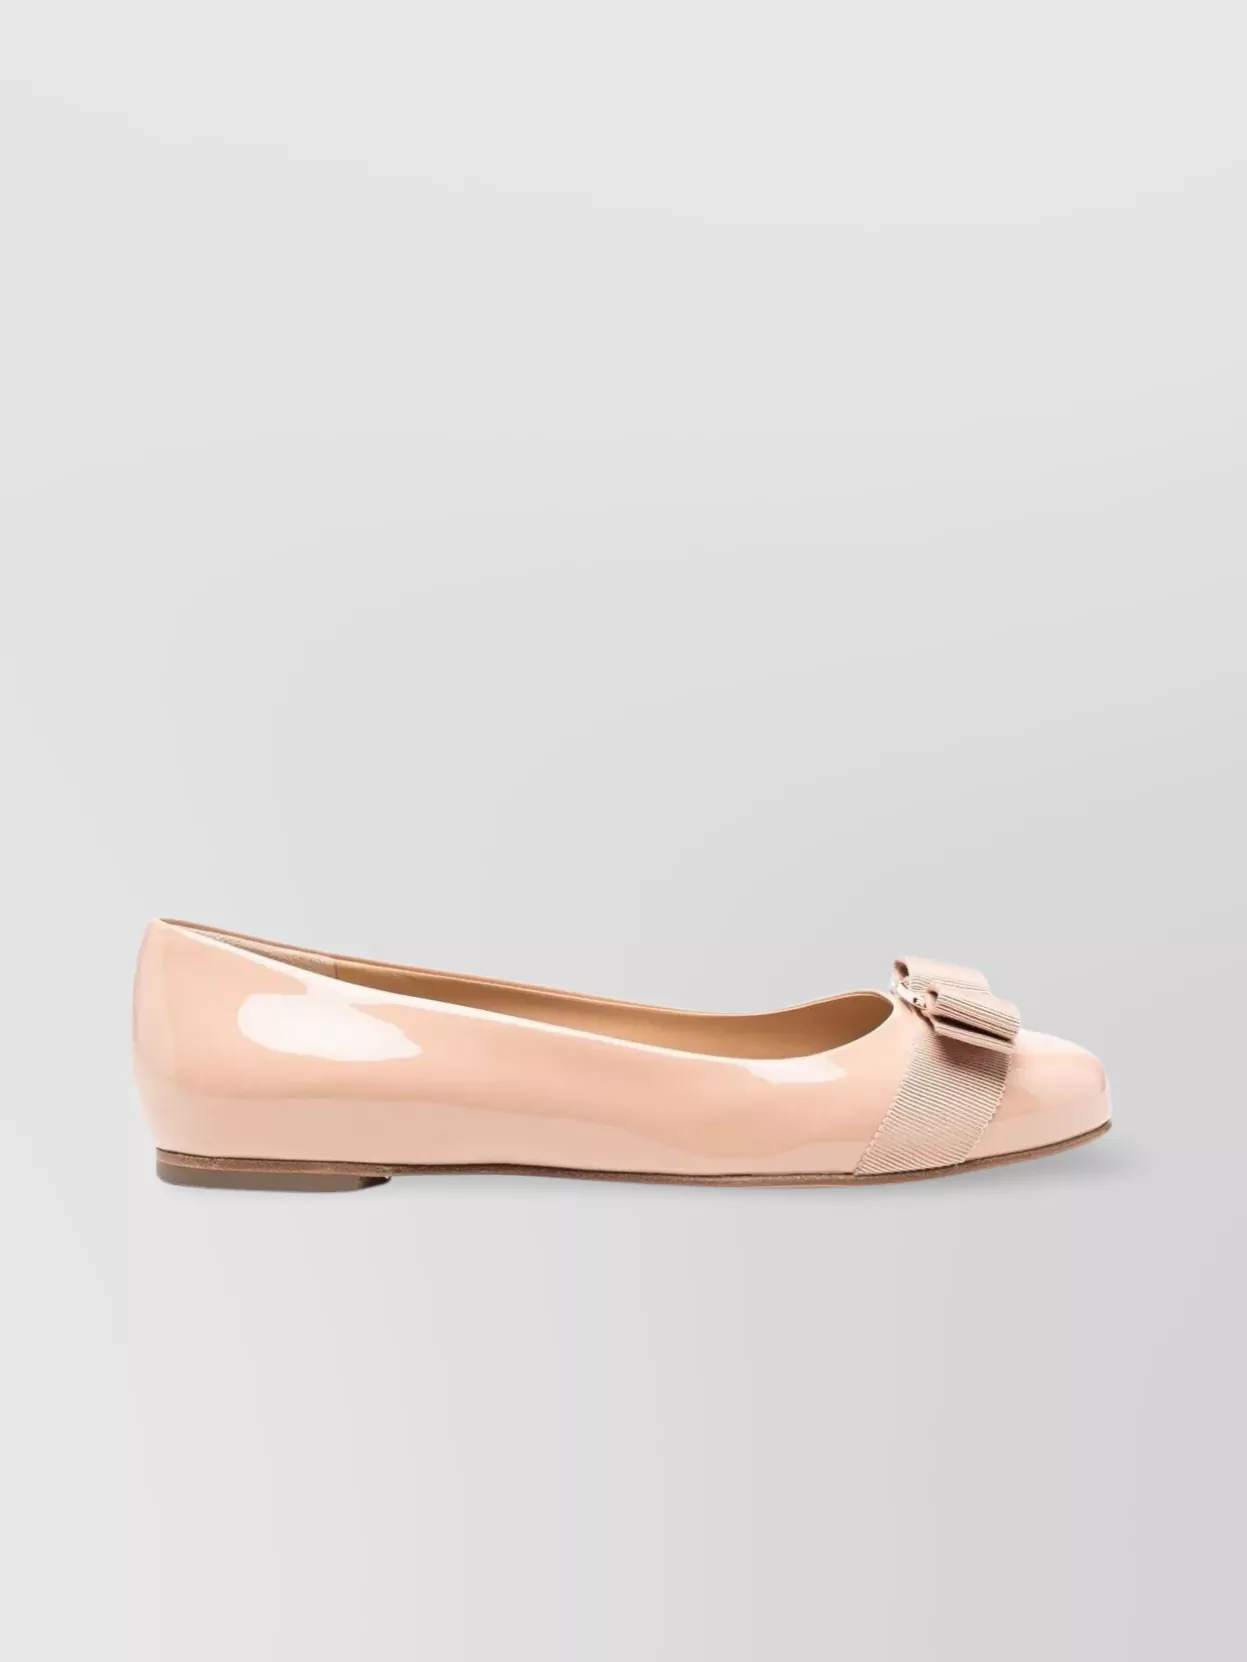 Shop Ferragamo Glossy Patent Leather Ballerina Shoes With Golden Plate